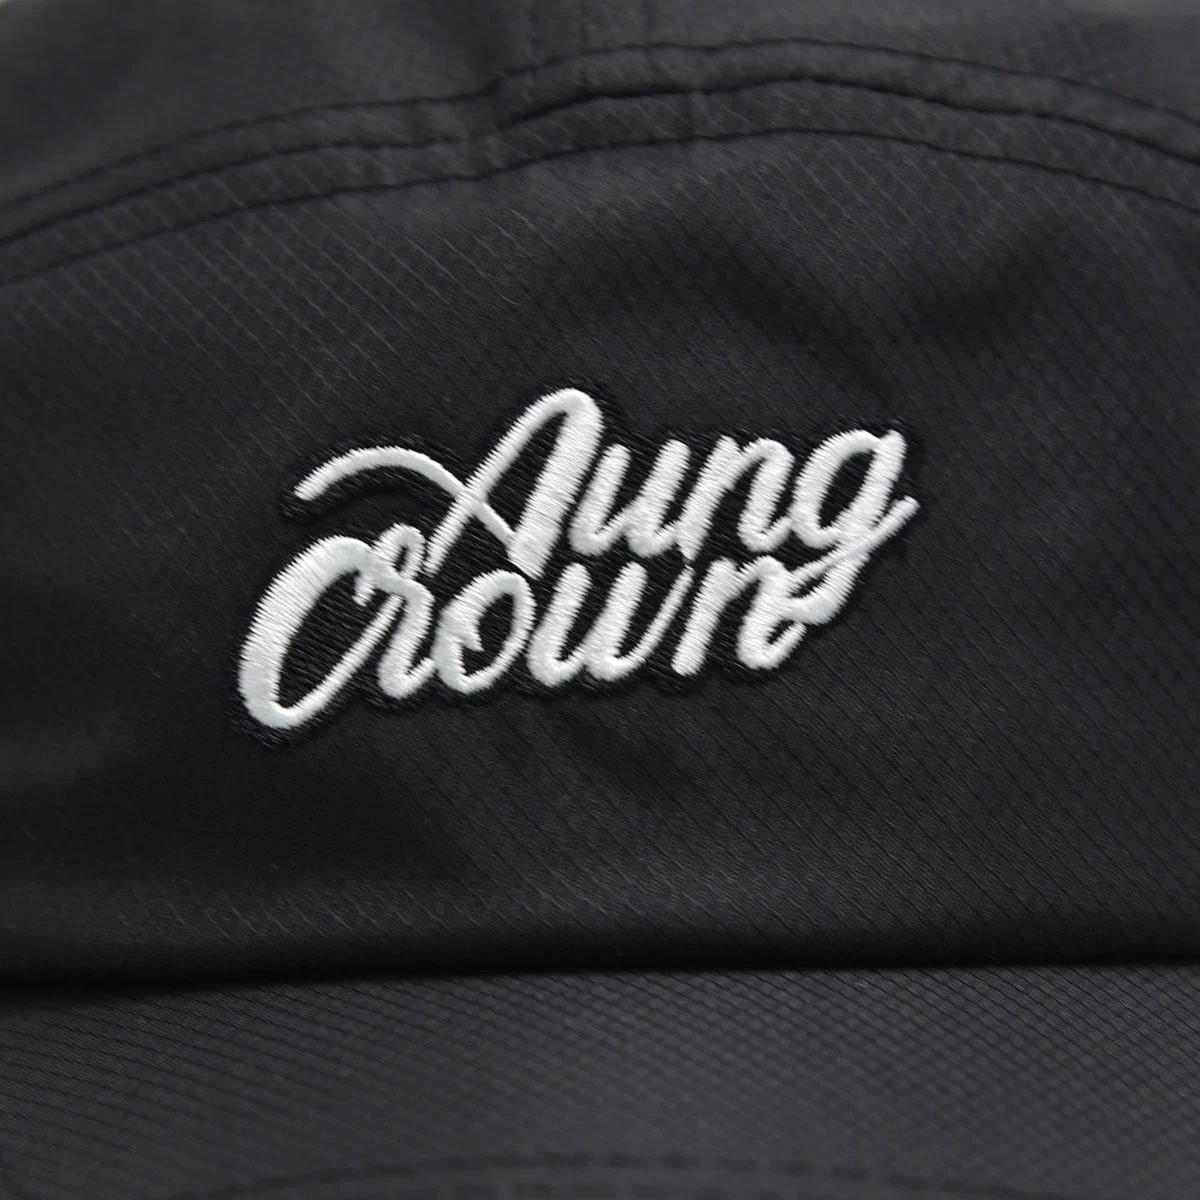 quick-drying fabric sports caps, aungcrown embroidery sports caps, embroidery logo black sports caps